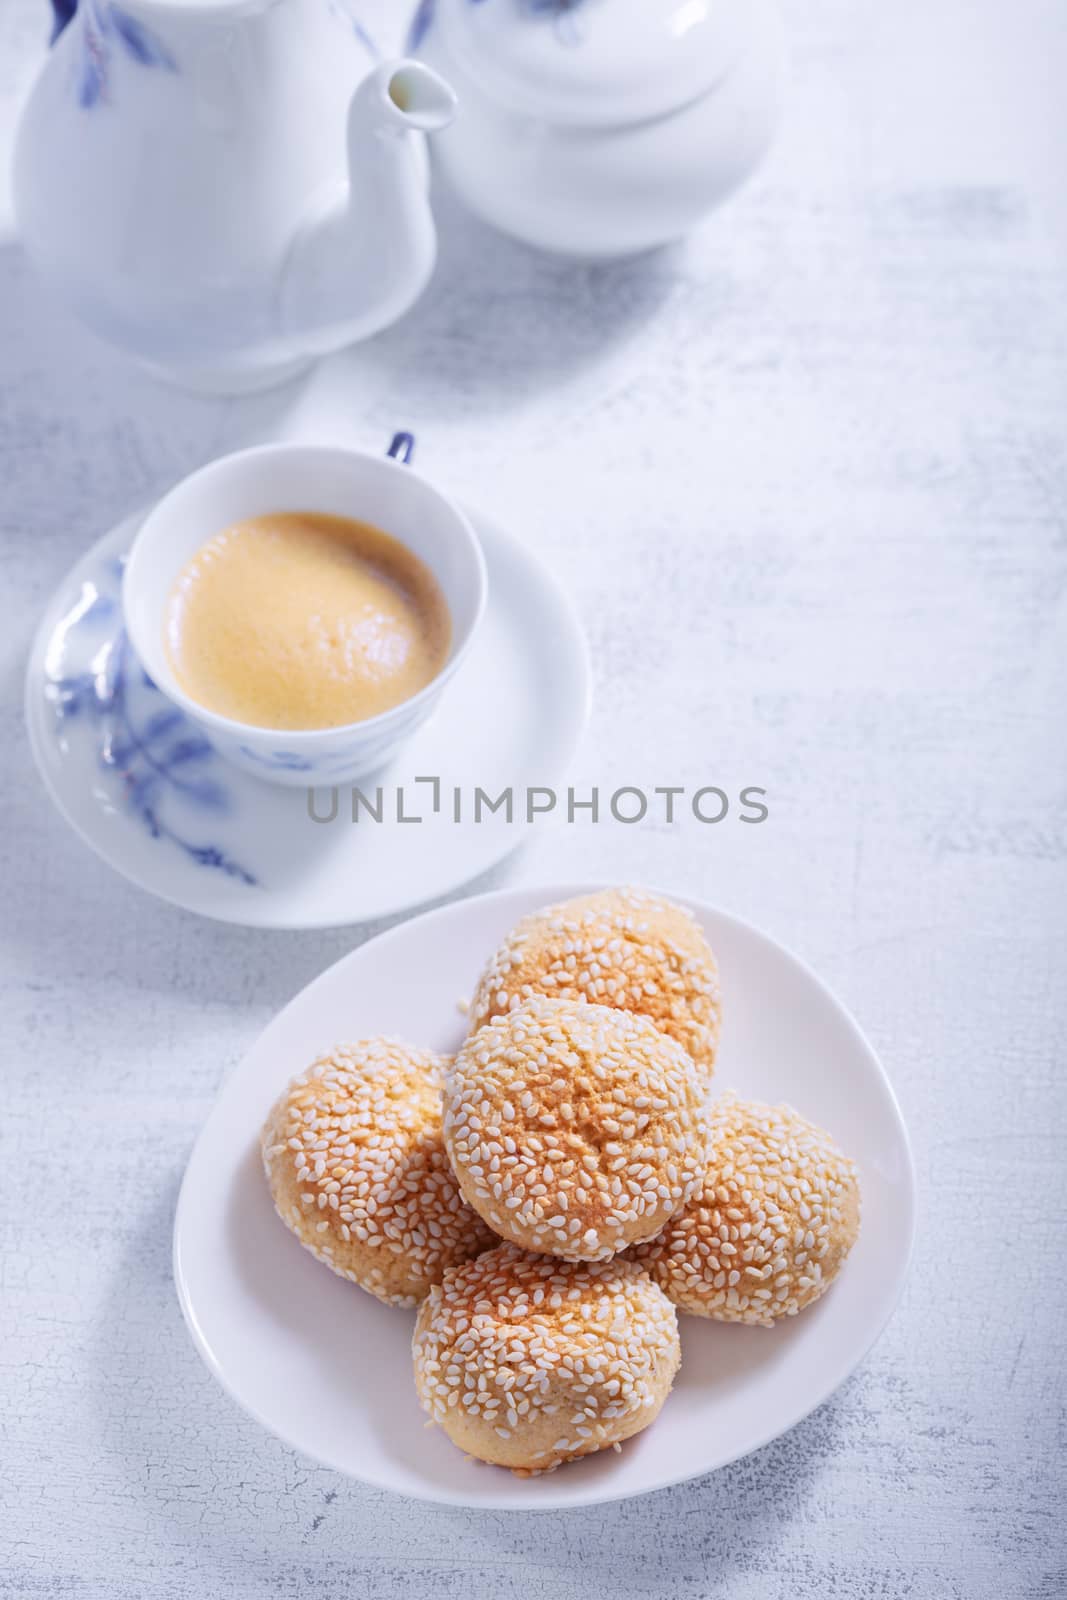 Almonds cookies with coffee served on a table